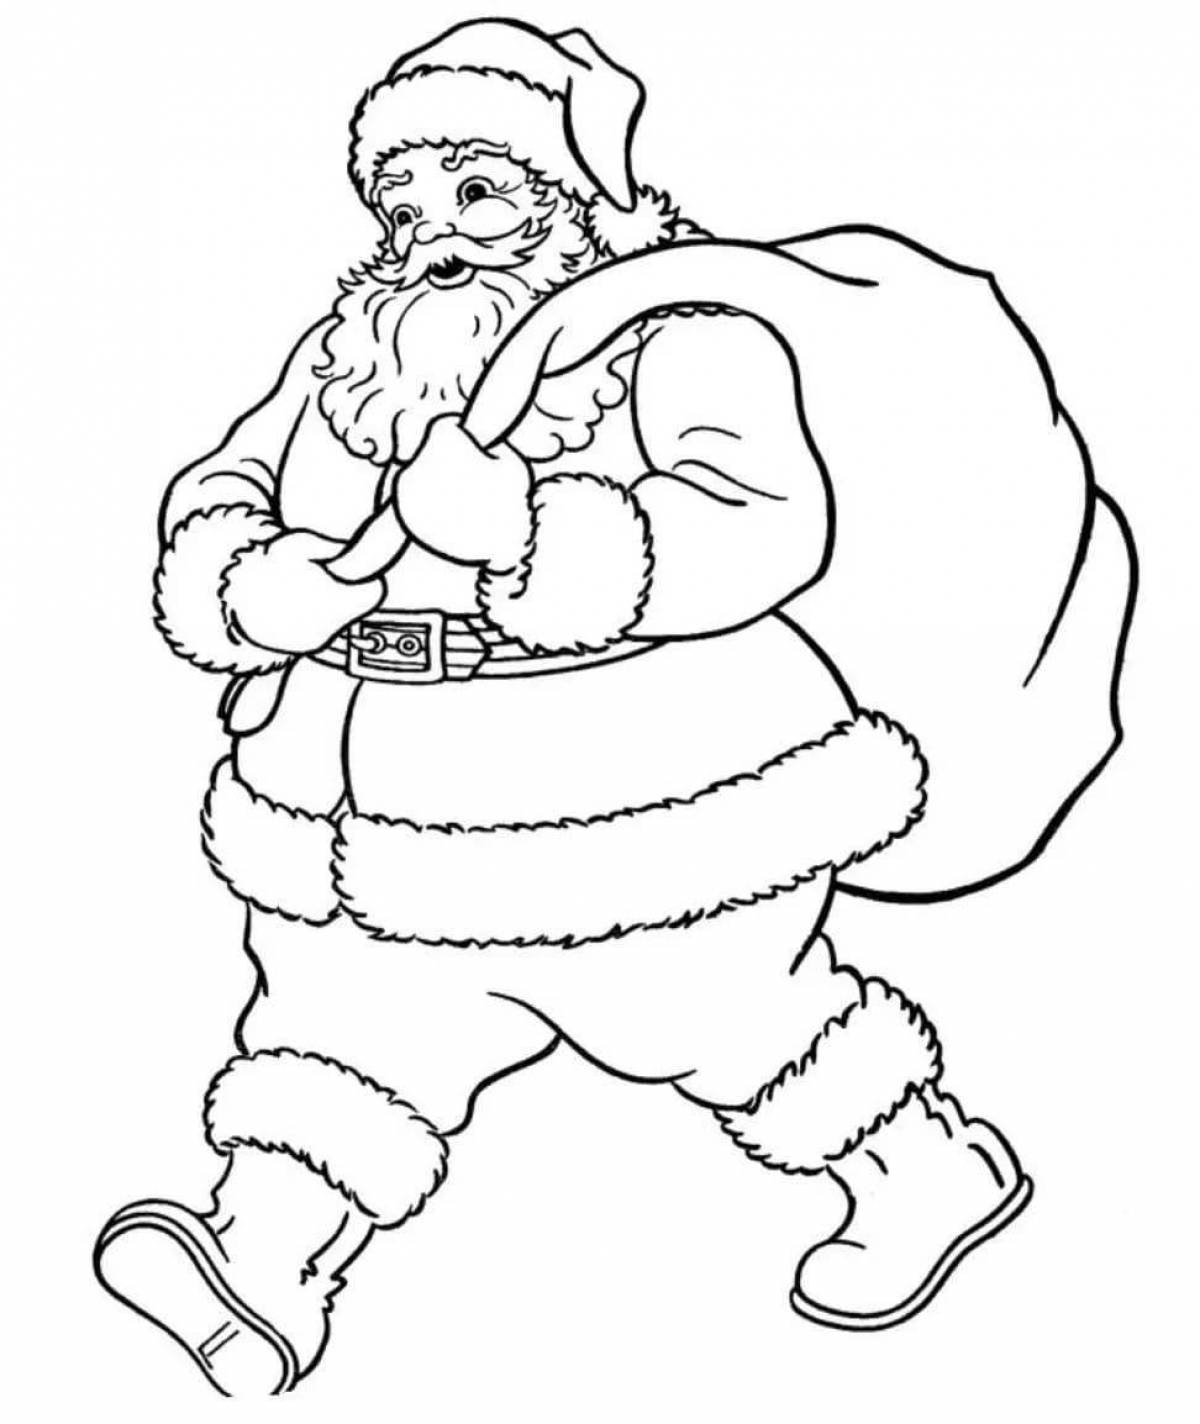 Fabulous grandfather coloring pages for kids